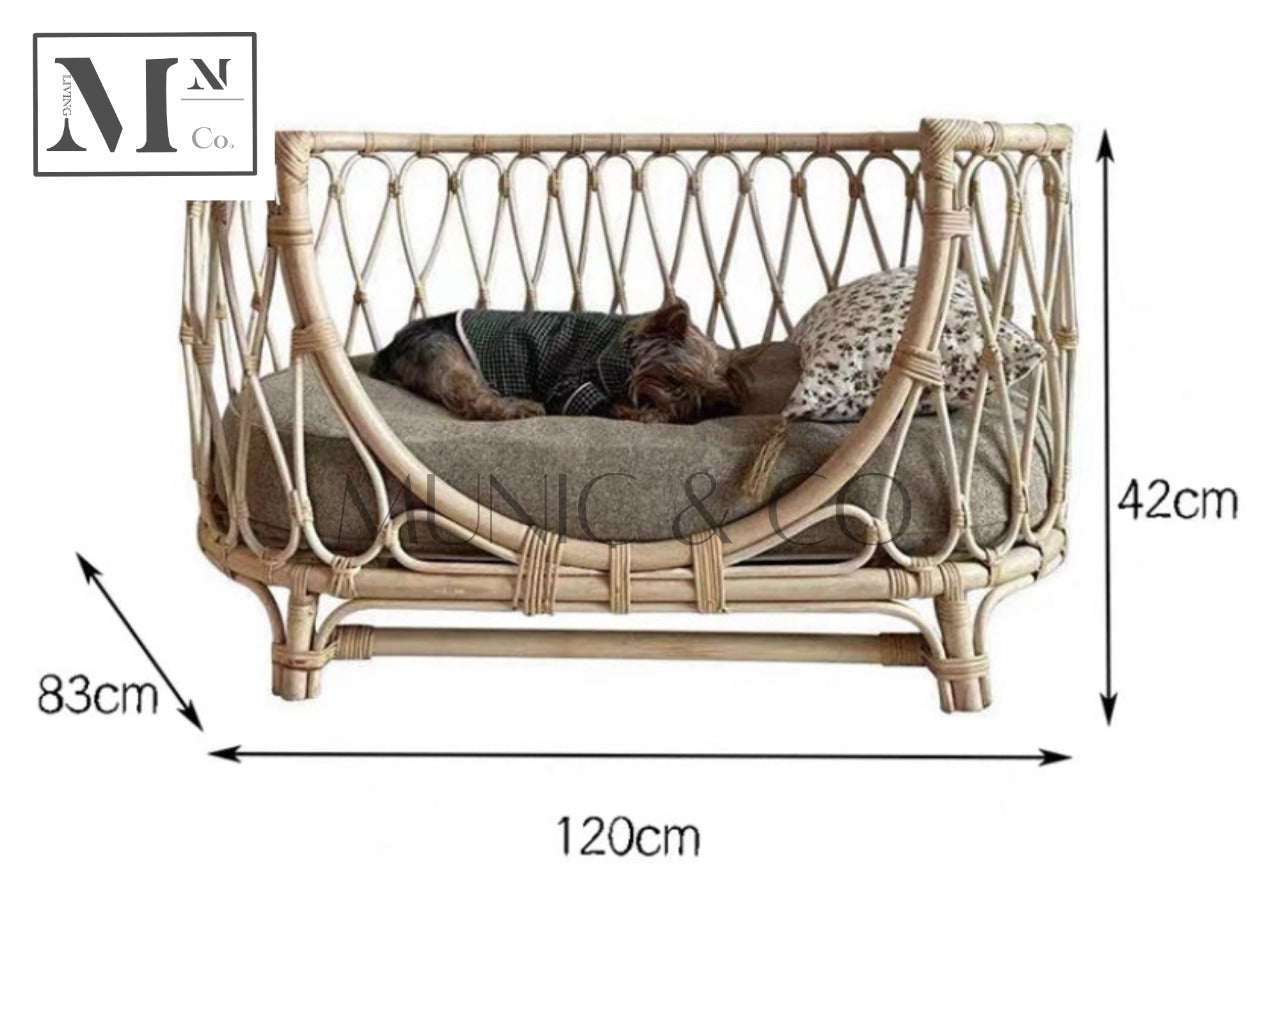 pawspals all natural rattan bed for dogs and cats.  pets rattan bed large (120lx42wx42h)